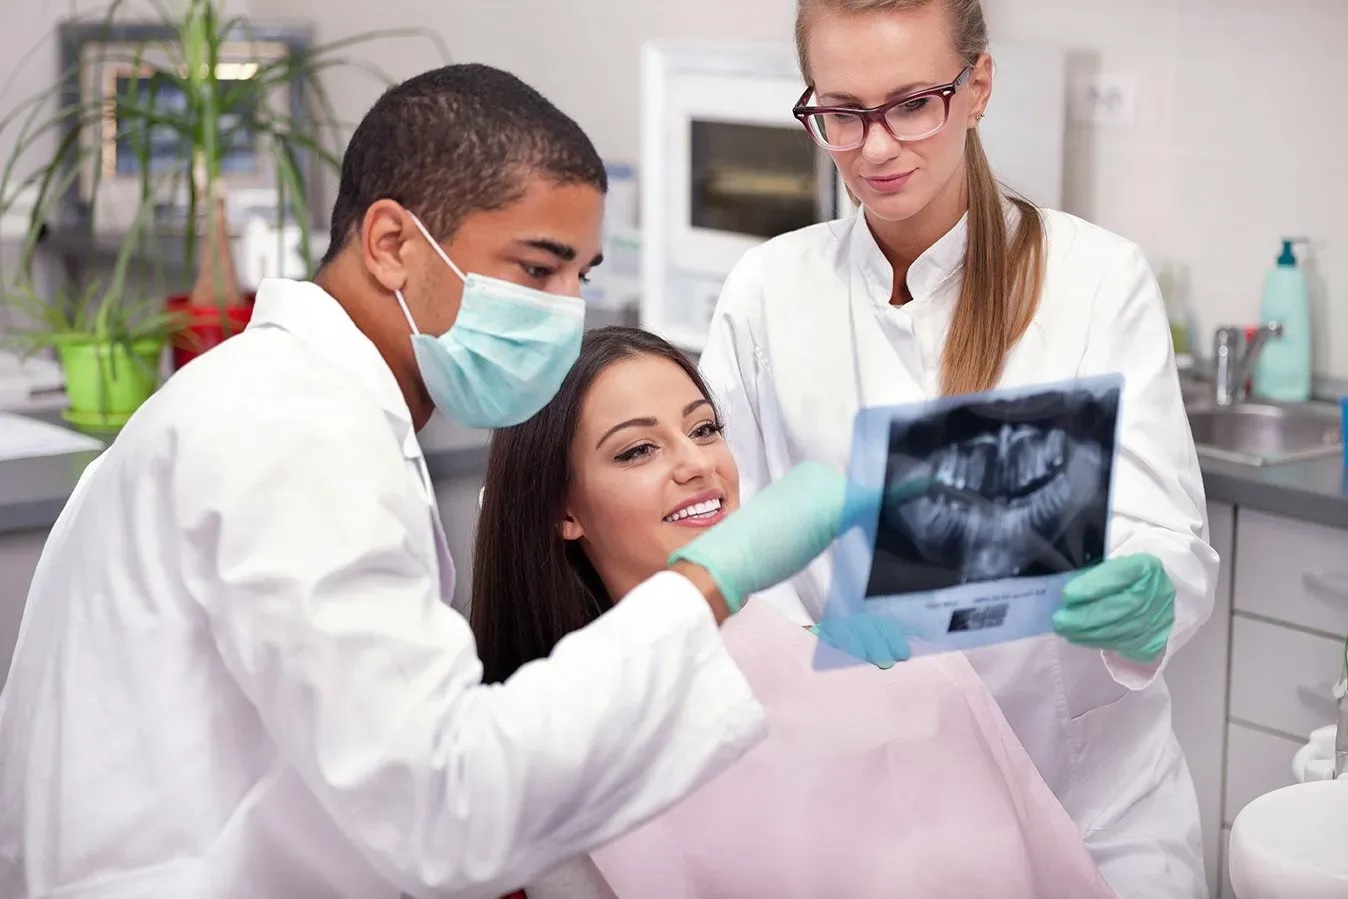 How to ensure you are consulting the right Periodontist in Dieppe?